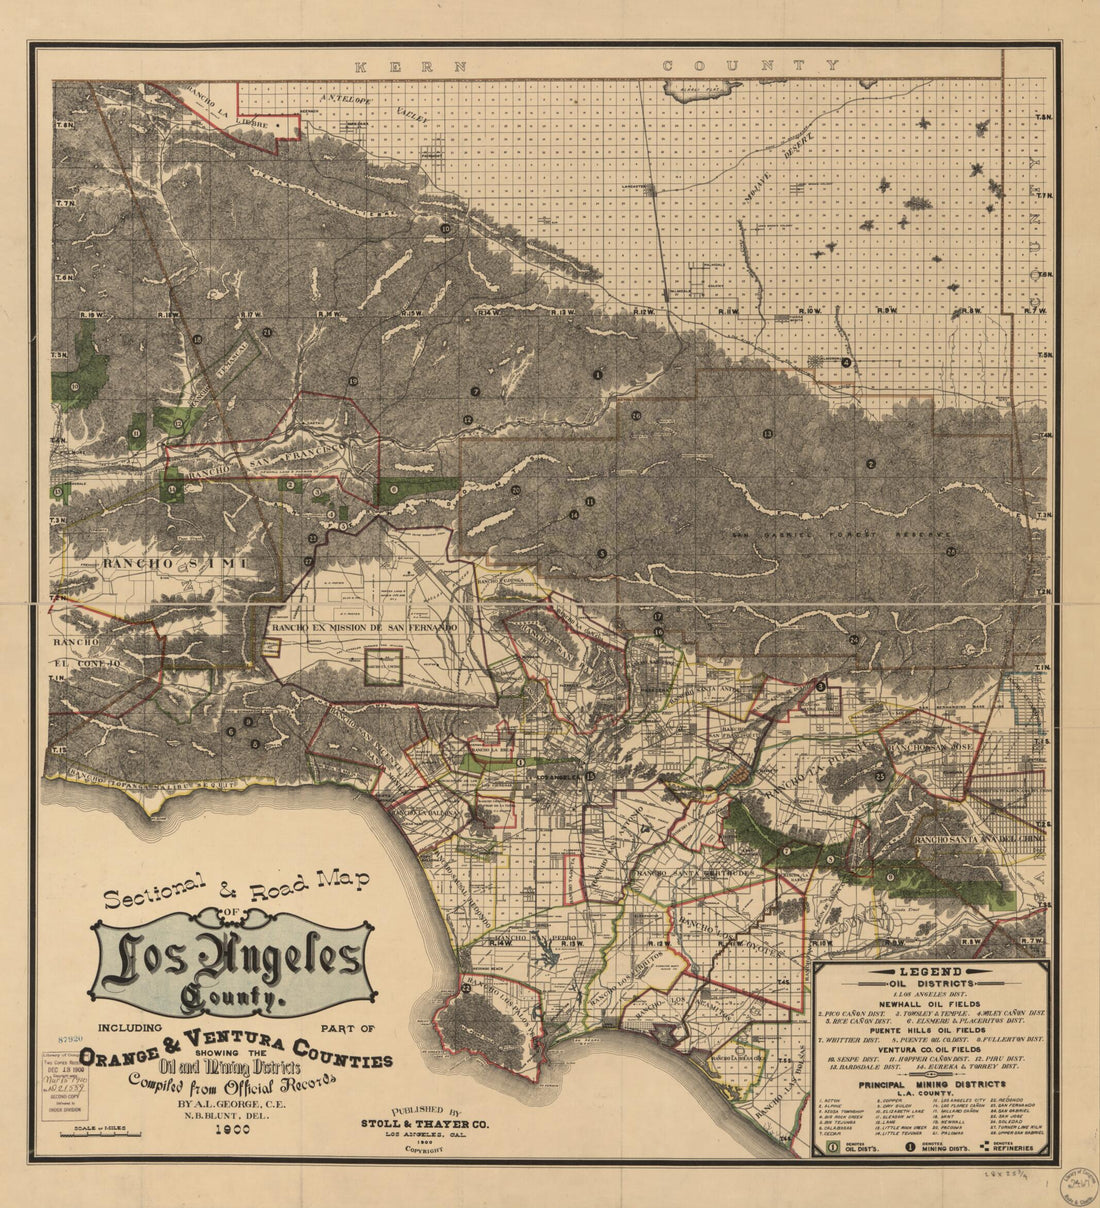 This old map of Sectional &amp; Road Map of Los Angeles County : Including Part of Orange and Ventura Counties, Showing the Oil and Mining Districts (Sectional and Road Map of Los Angeles County) from 1900 was created by A. L. George,  Stoll &amp; Thayer in 1900